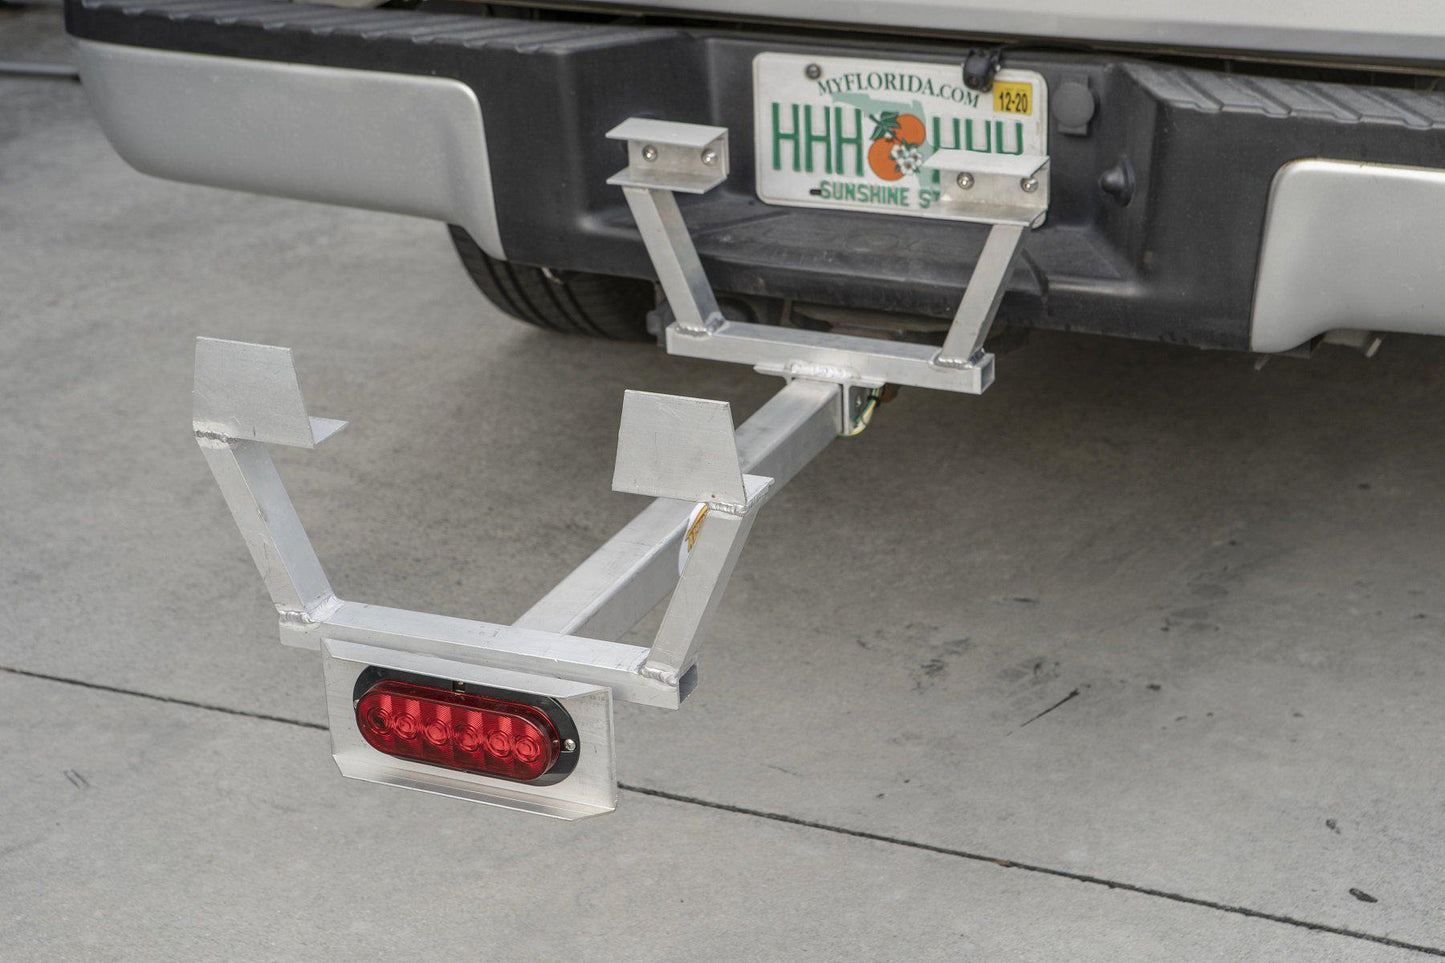 Alumacart Wagon Hitch with LED Brake Light - LEAD TIME TO SHIP 10 TO 12 BUSINESS DAYS